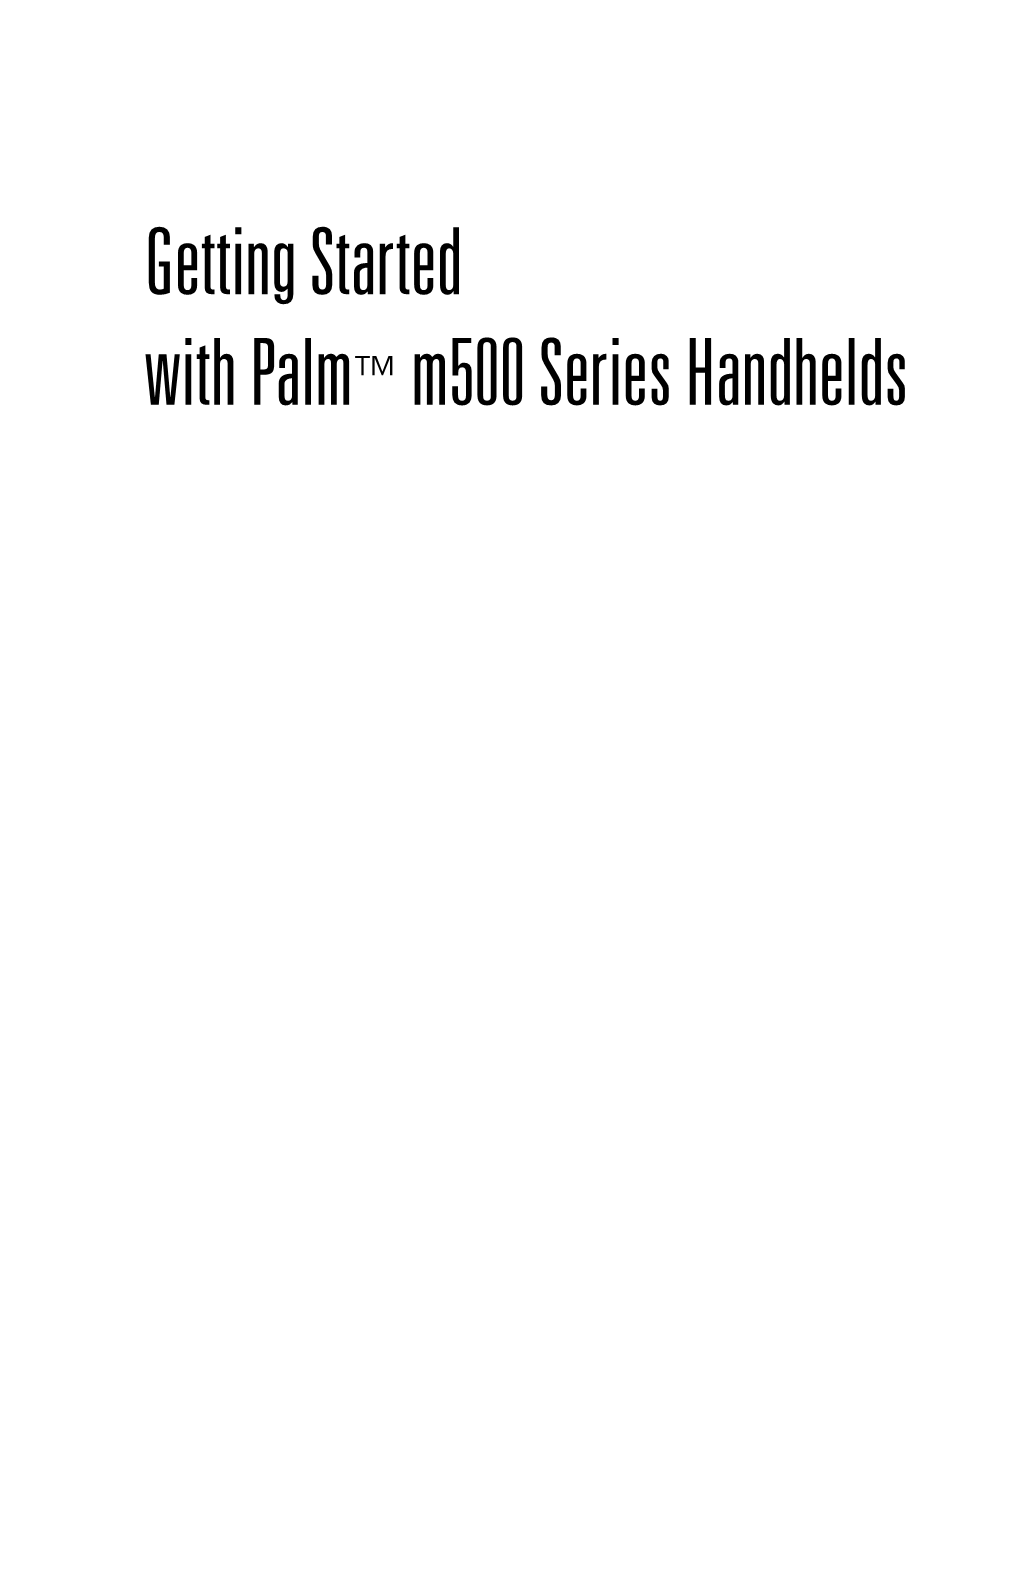 Getting Started with Palm M500 Series Handhelds